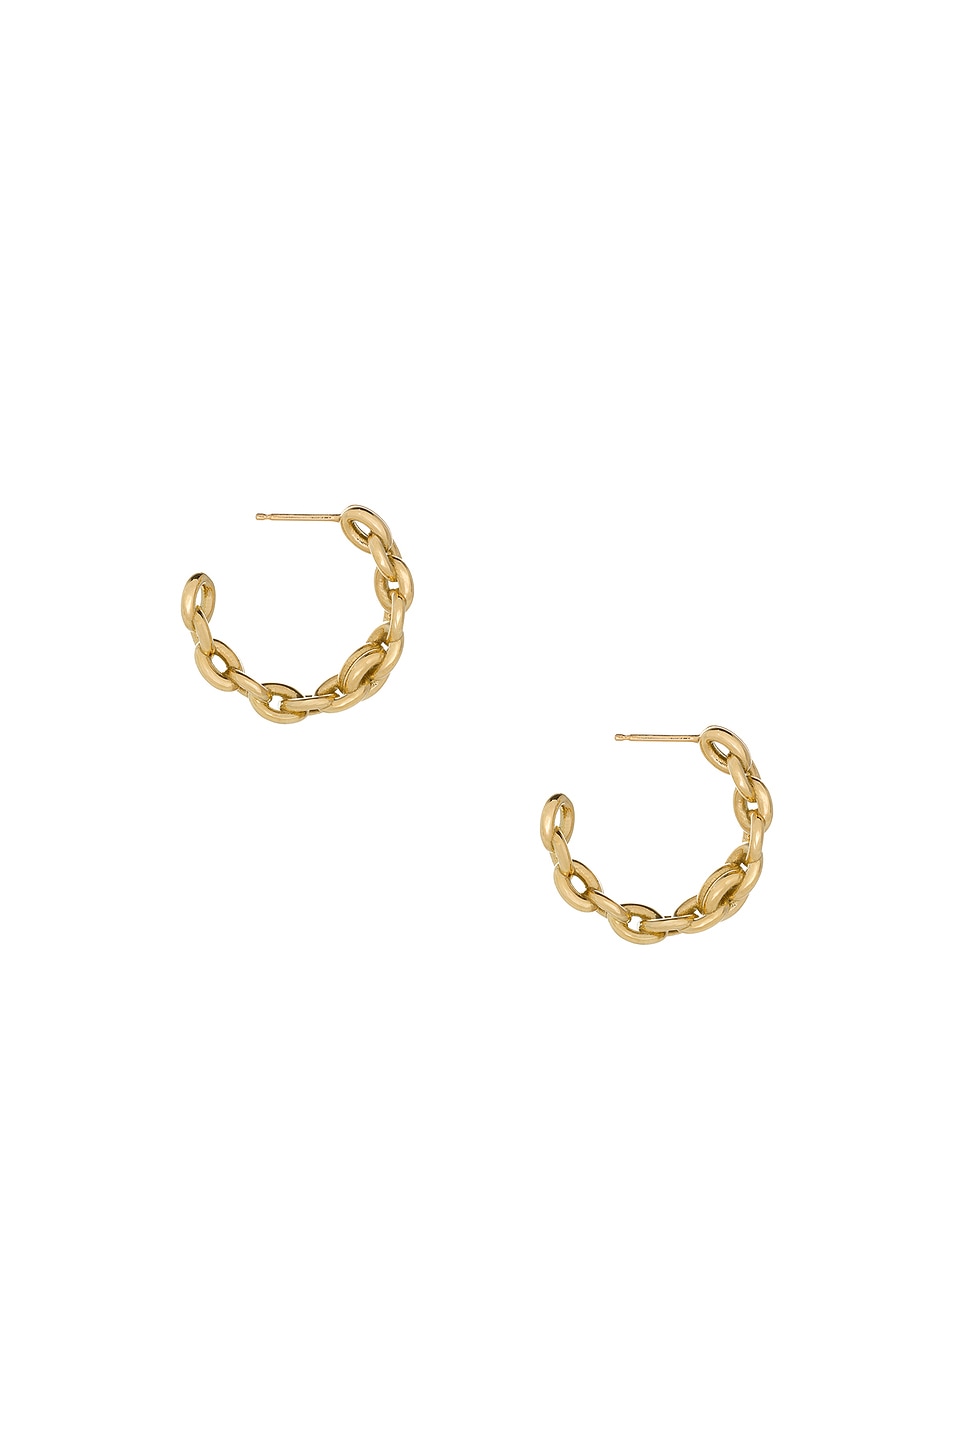 Image 1 of Spinelli Kilcollin Fused Serpens Earrings in 18k Yellow Gold